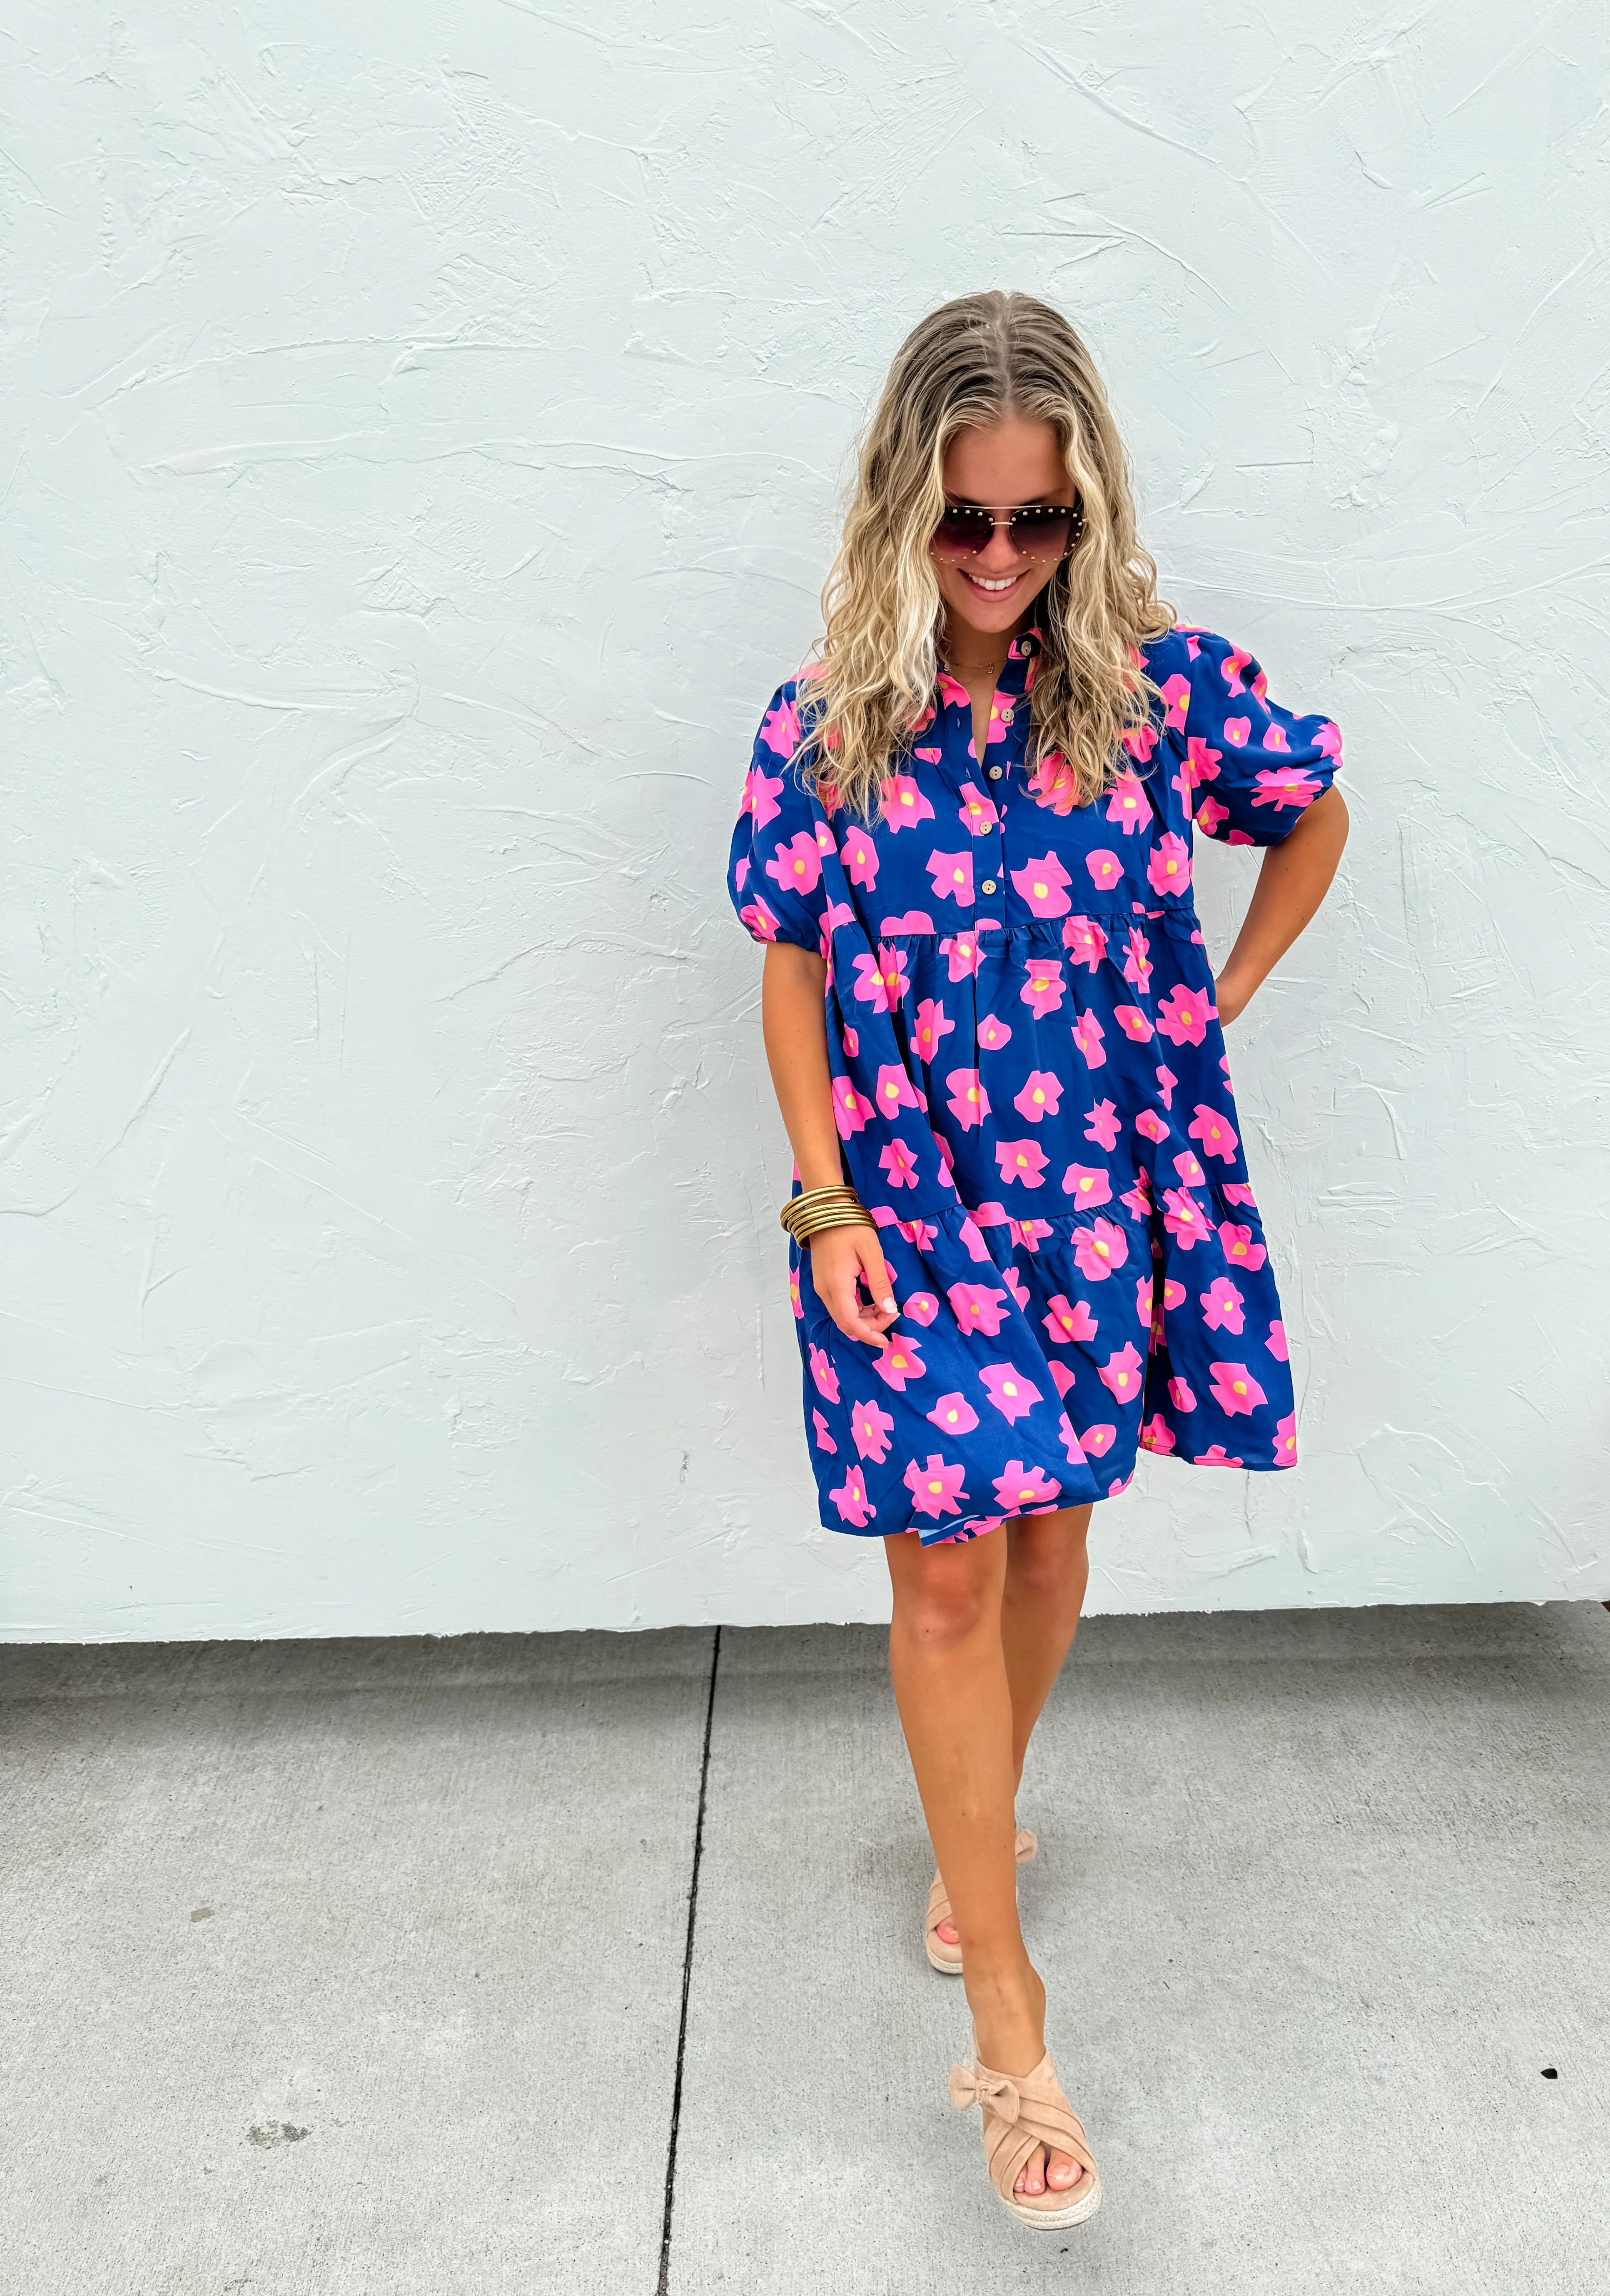 PREORDER: Summer Blooms Floral Dress in Two Colors (Ships Early July)